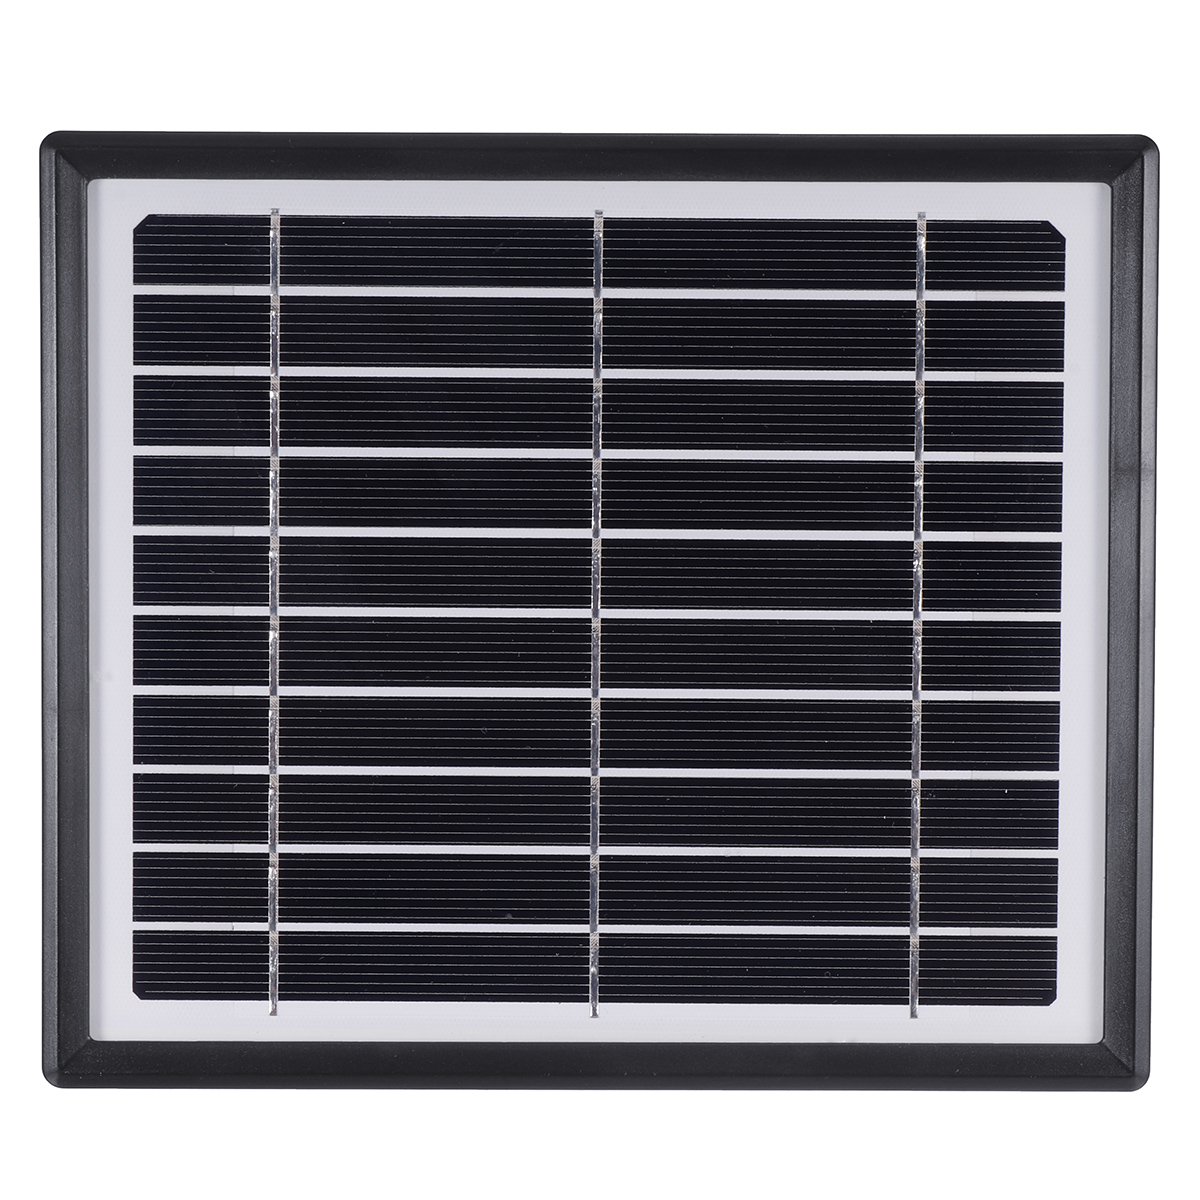 360° Adjustable 5V 3.3W Solar Panel IP67 Waterproof Continuous Power for Outdoor Security Camera